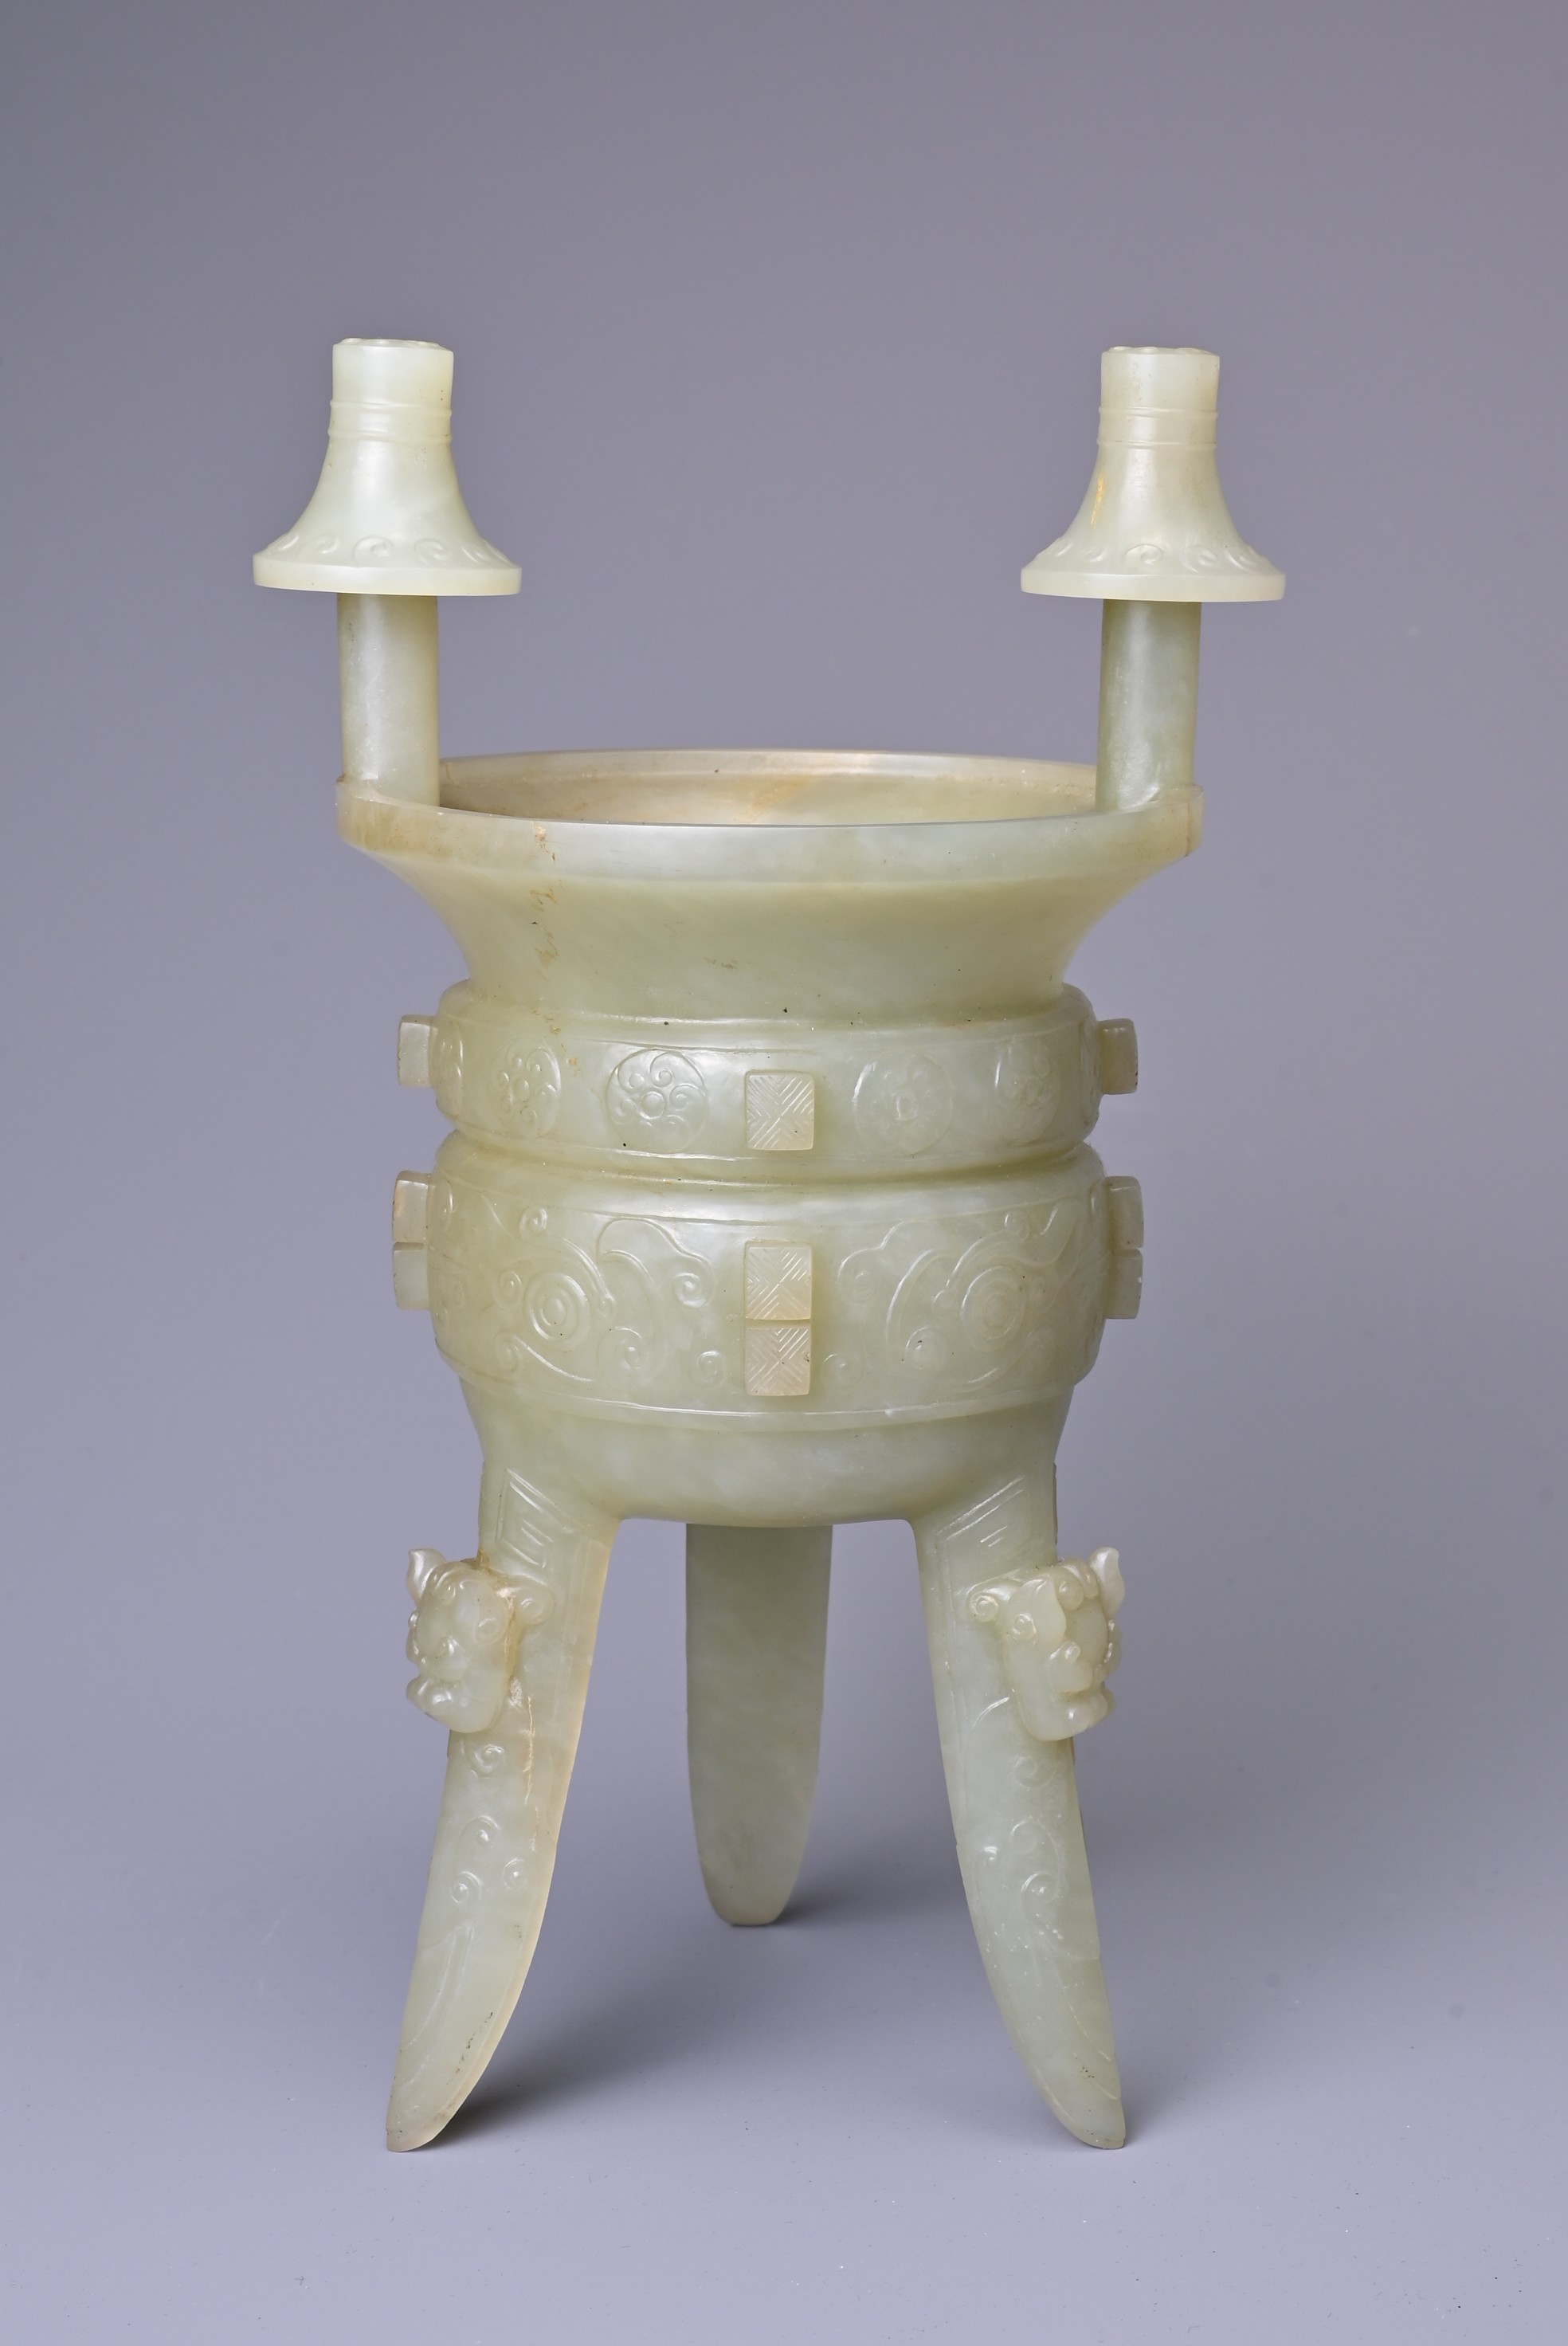 A CHINESE CELADON JADE TRIPOD VESSEL, JIA, QING DYNASTY. Modelled on the archaic bronze ceremonial - Image 2 of 7